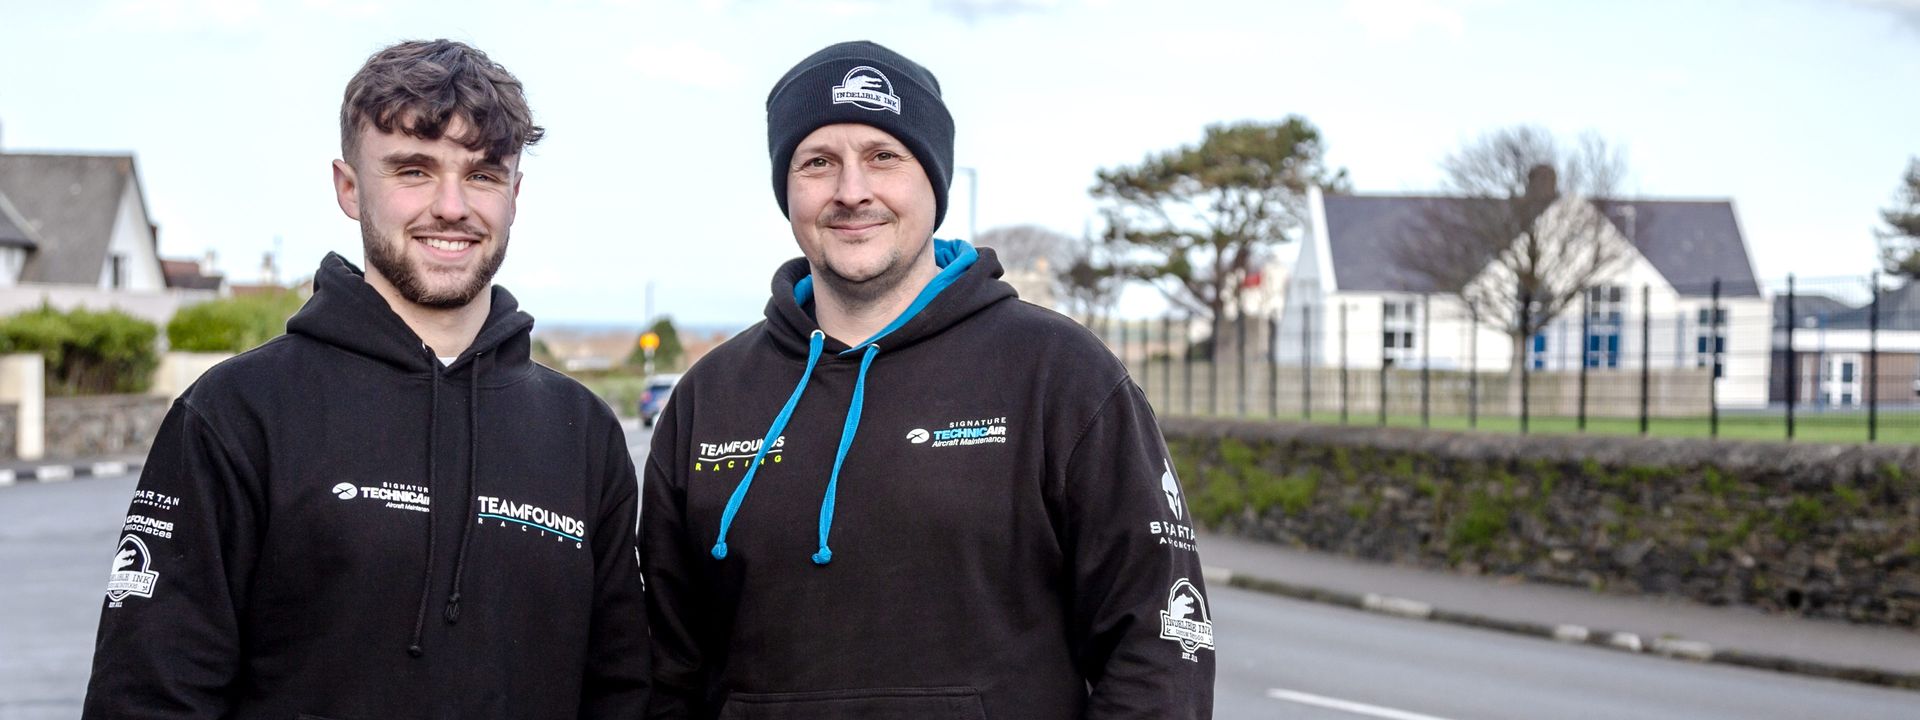 The Founds family are set to continue their strong sidecar tradition at the Isle of Man TT Races with the coming of a third generation, as two-time podium finisher Alan Founds will be joined by nephew Rhys Gibbons at TT 2024.